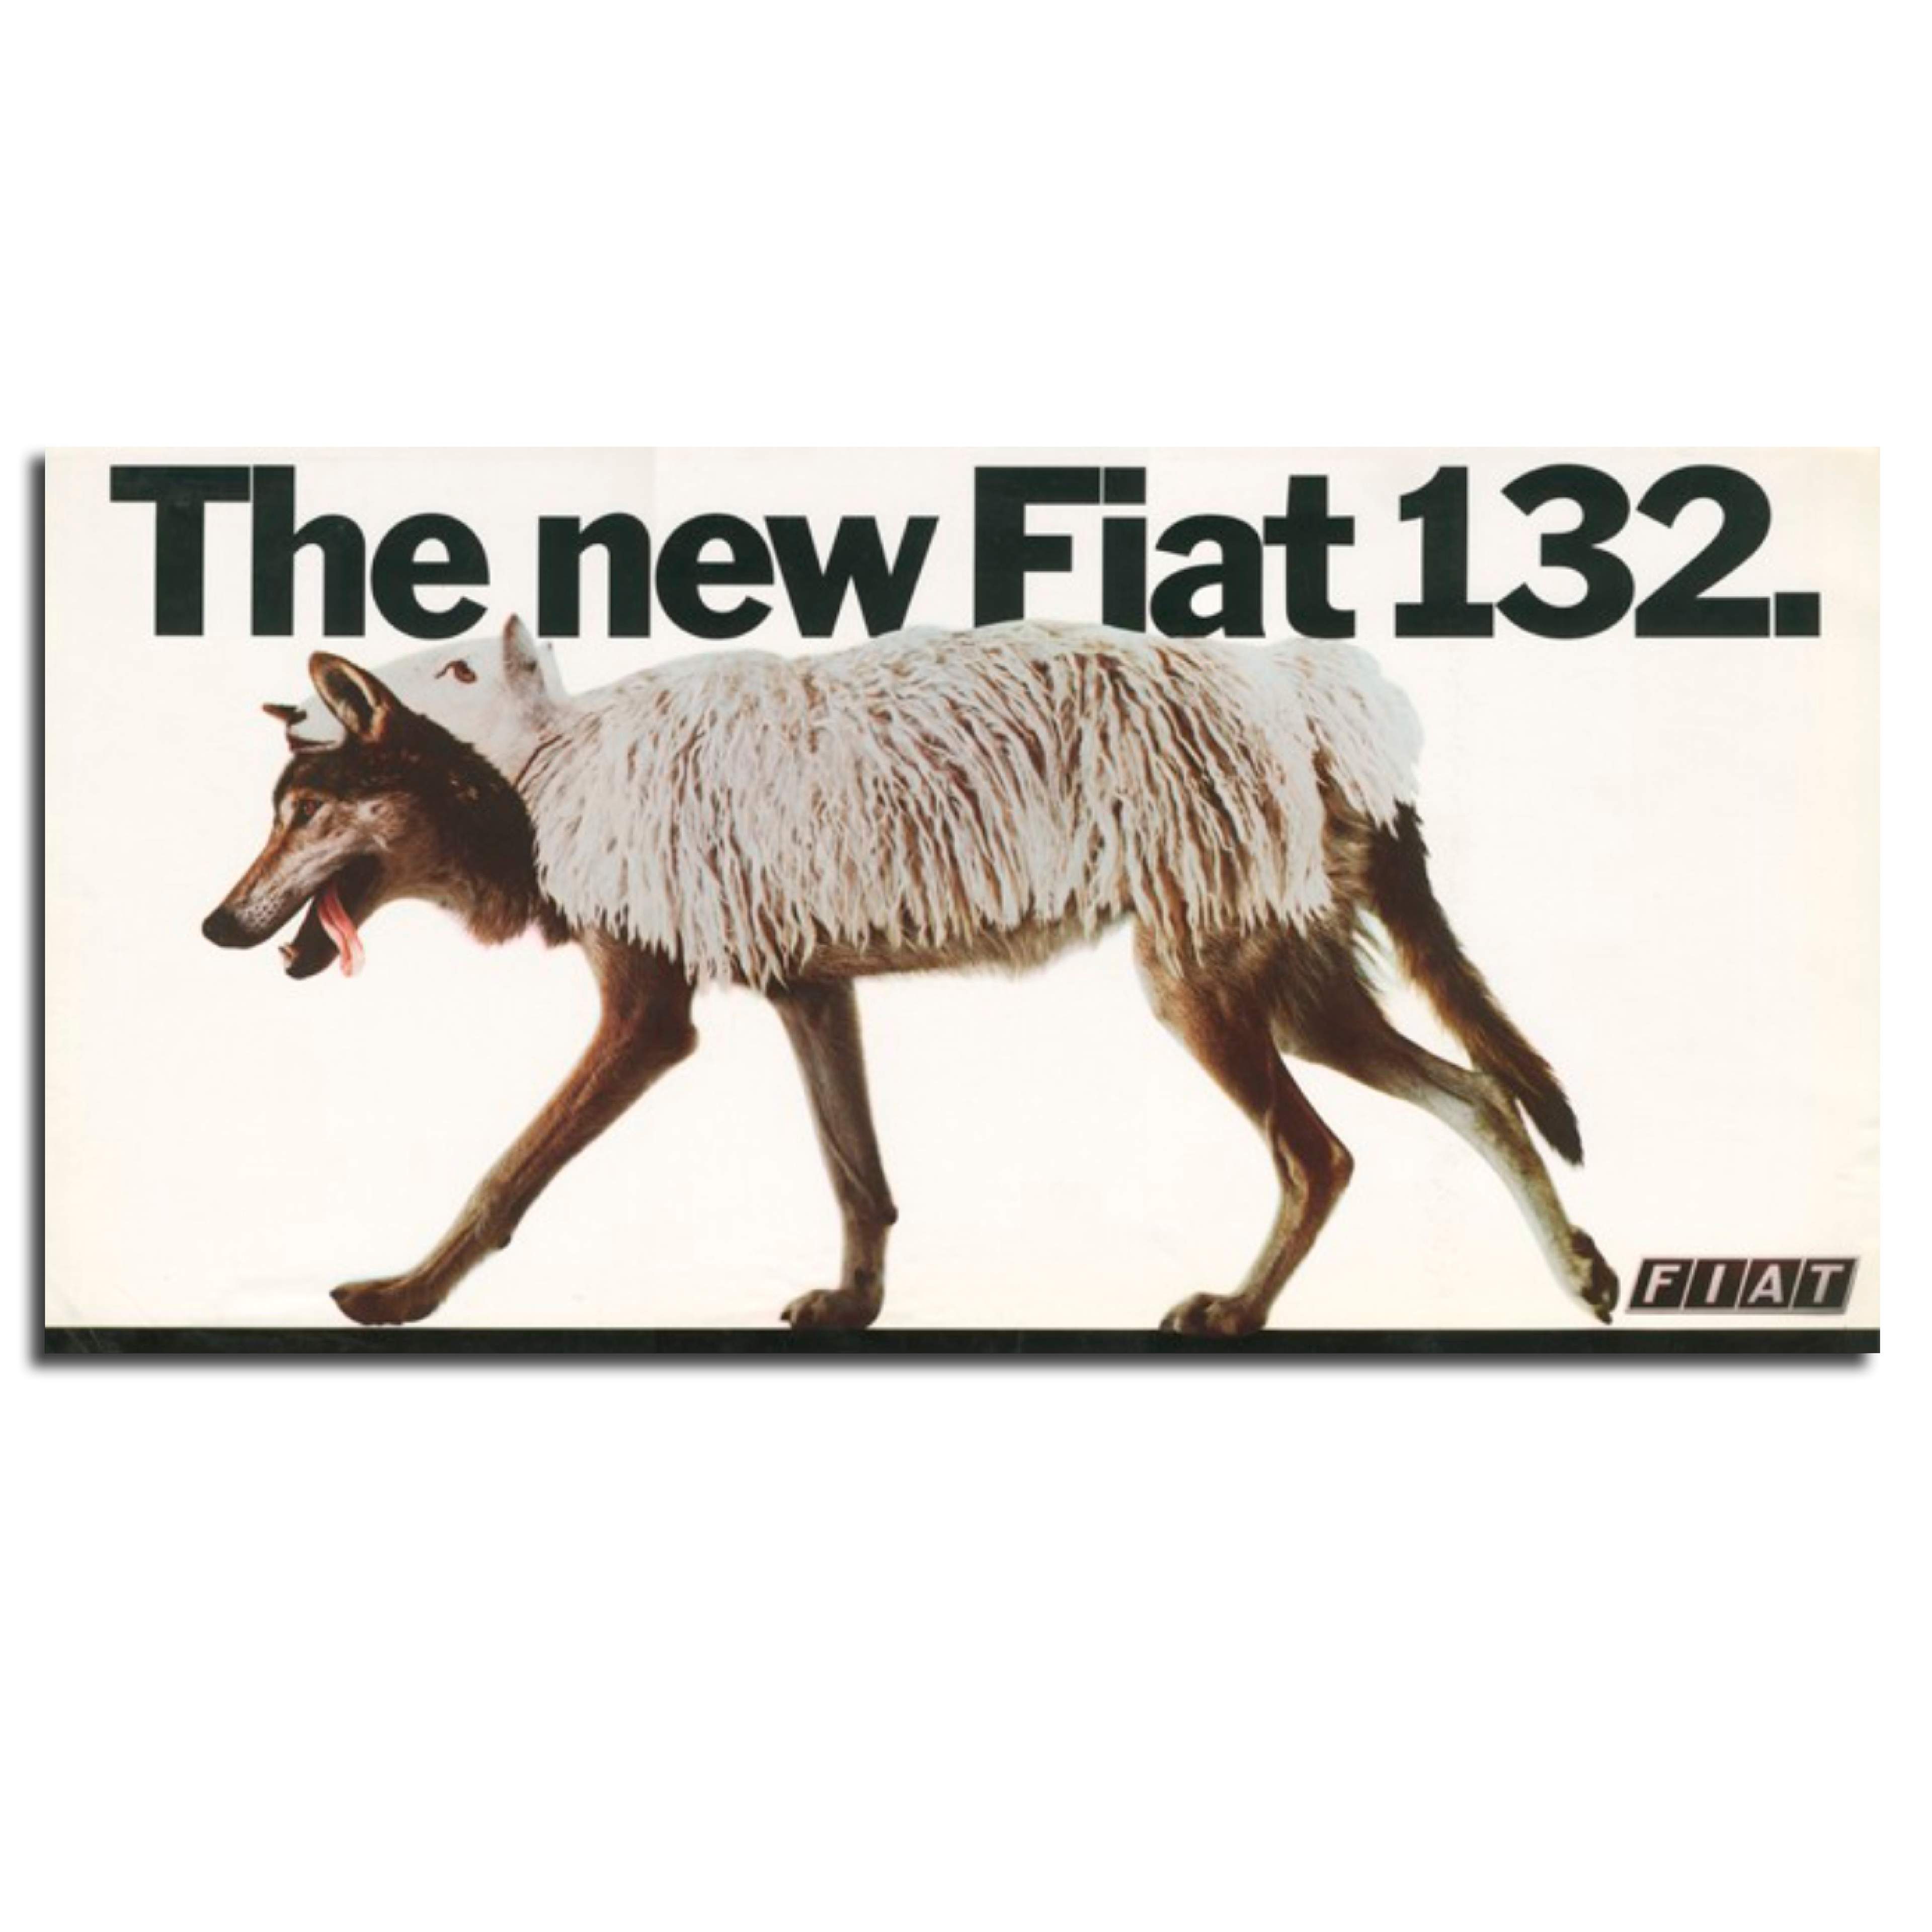 Photo of a wolf in sheep's clothing. Award-winning poster for Fiat 132.